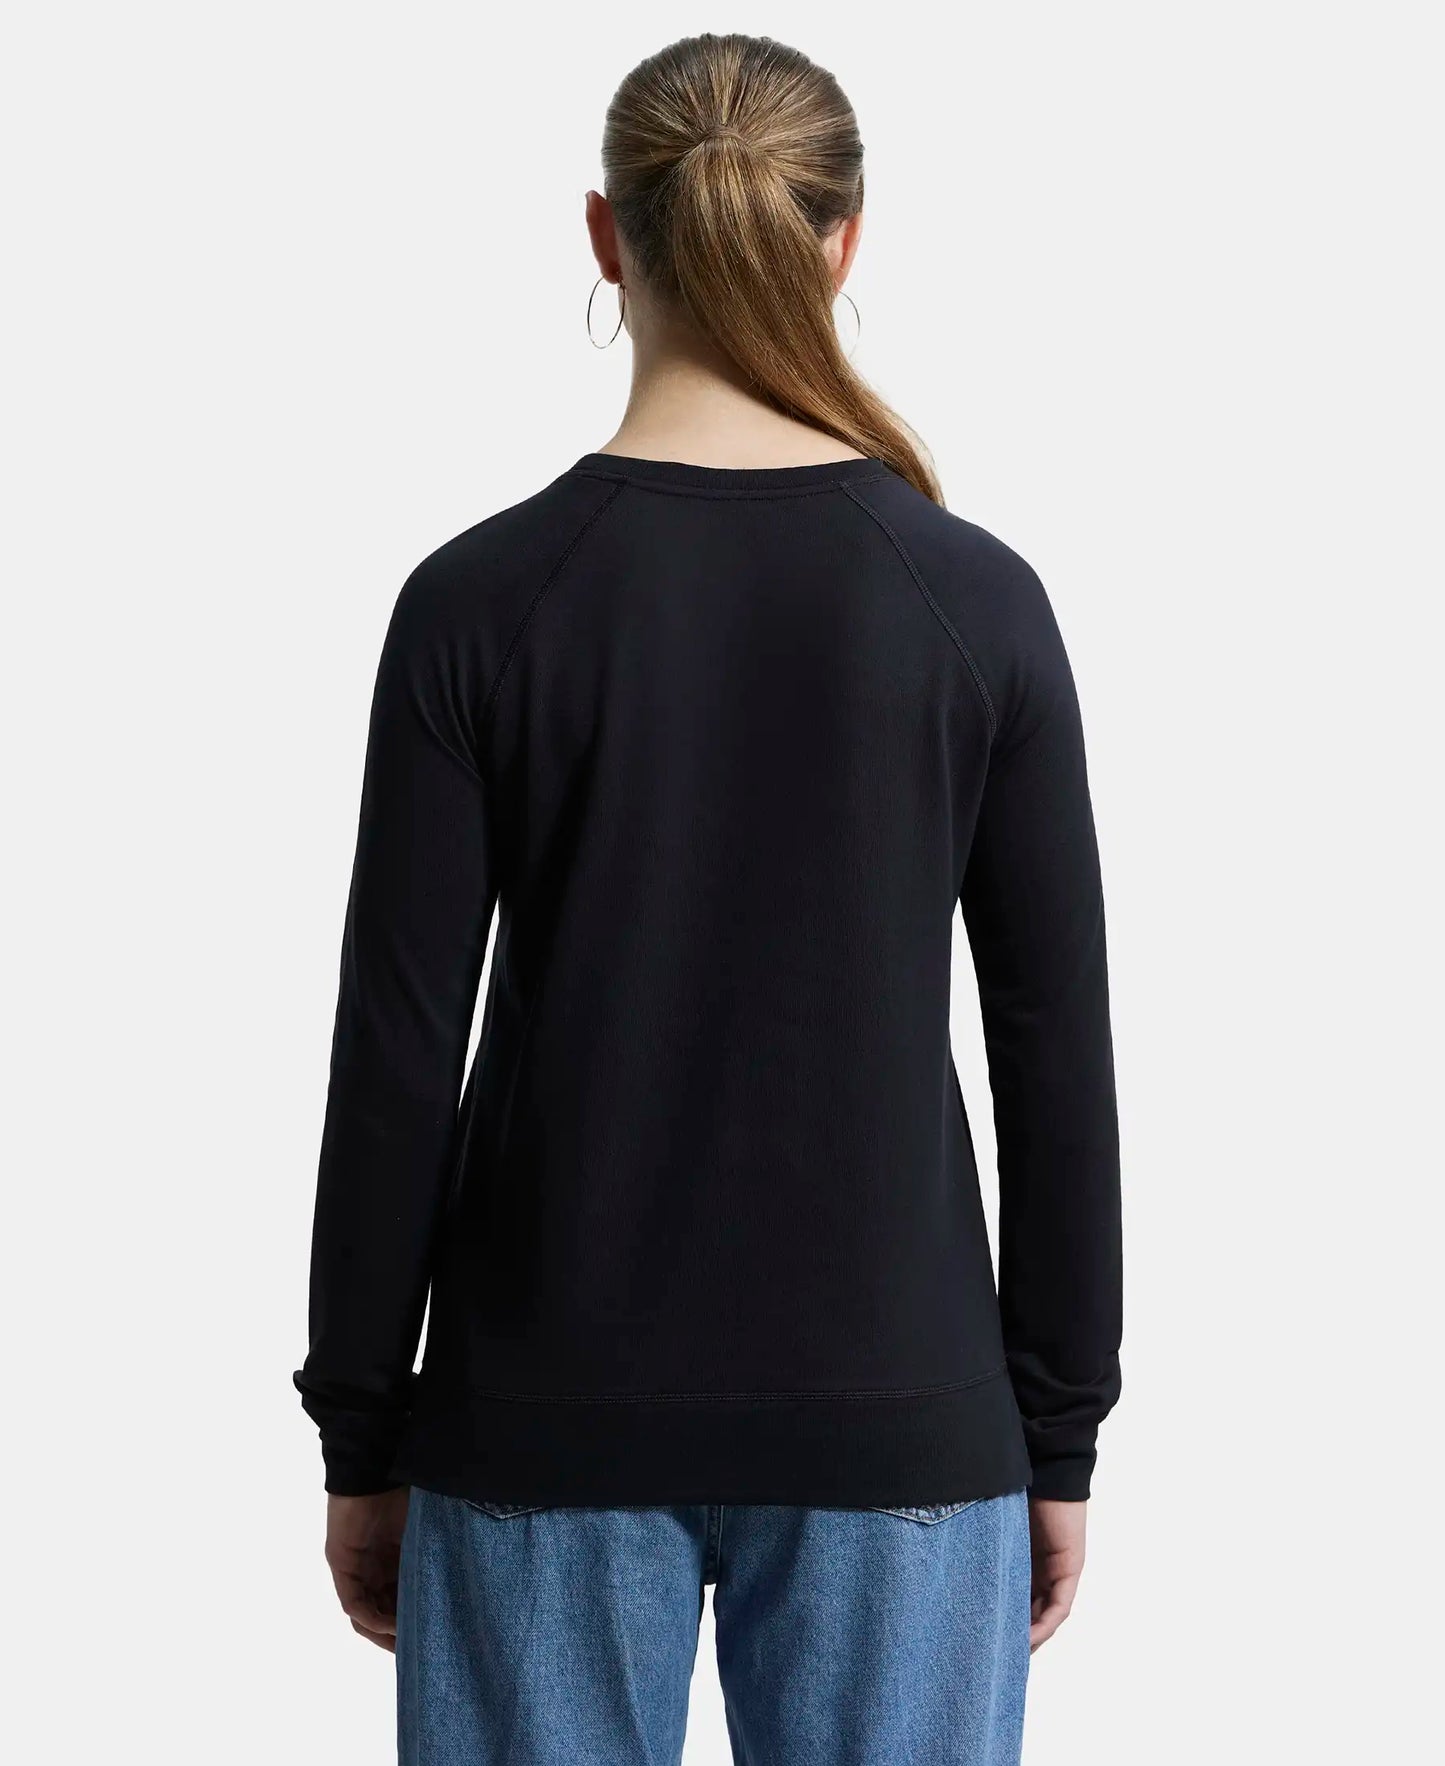 Super Combed Cotton Rich French Terry Fabric Solid Sweatshirt with Raglan Sleeve Styling - Black-3